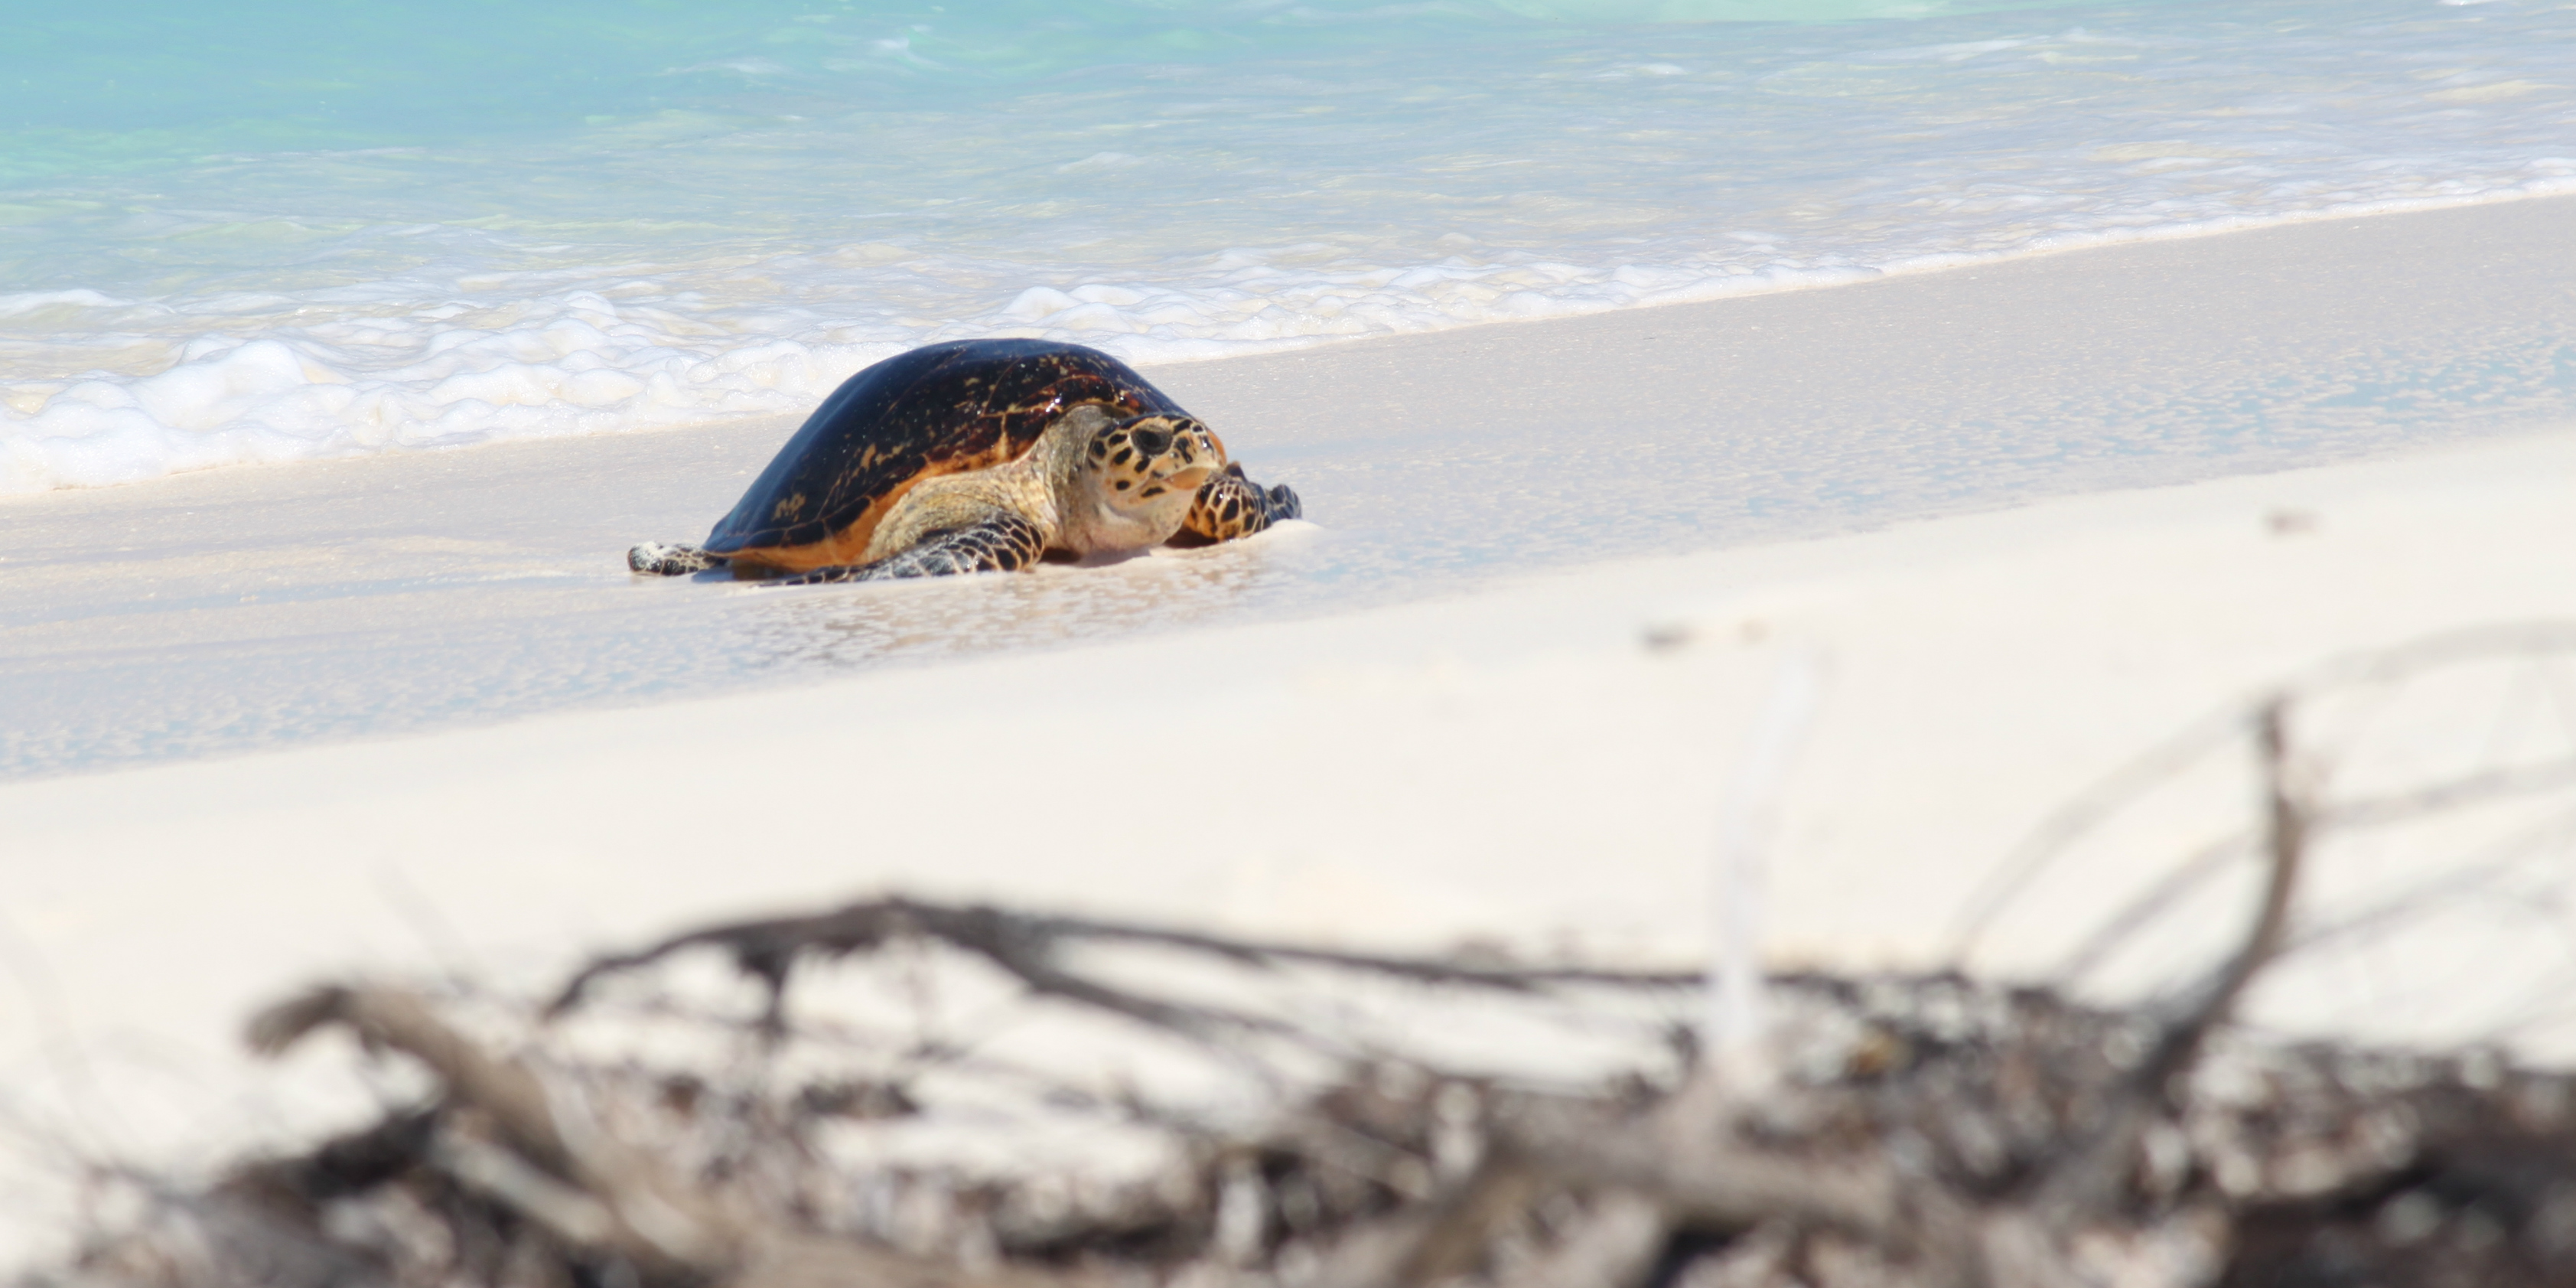 A hawksbill turtle on a beach in the Seychelles archipelago, where wildlife conservation efforts focus on returning balance to nature. 